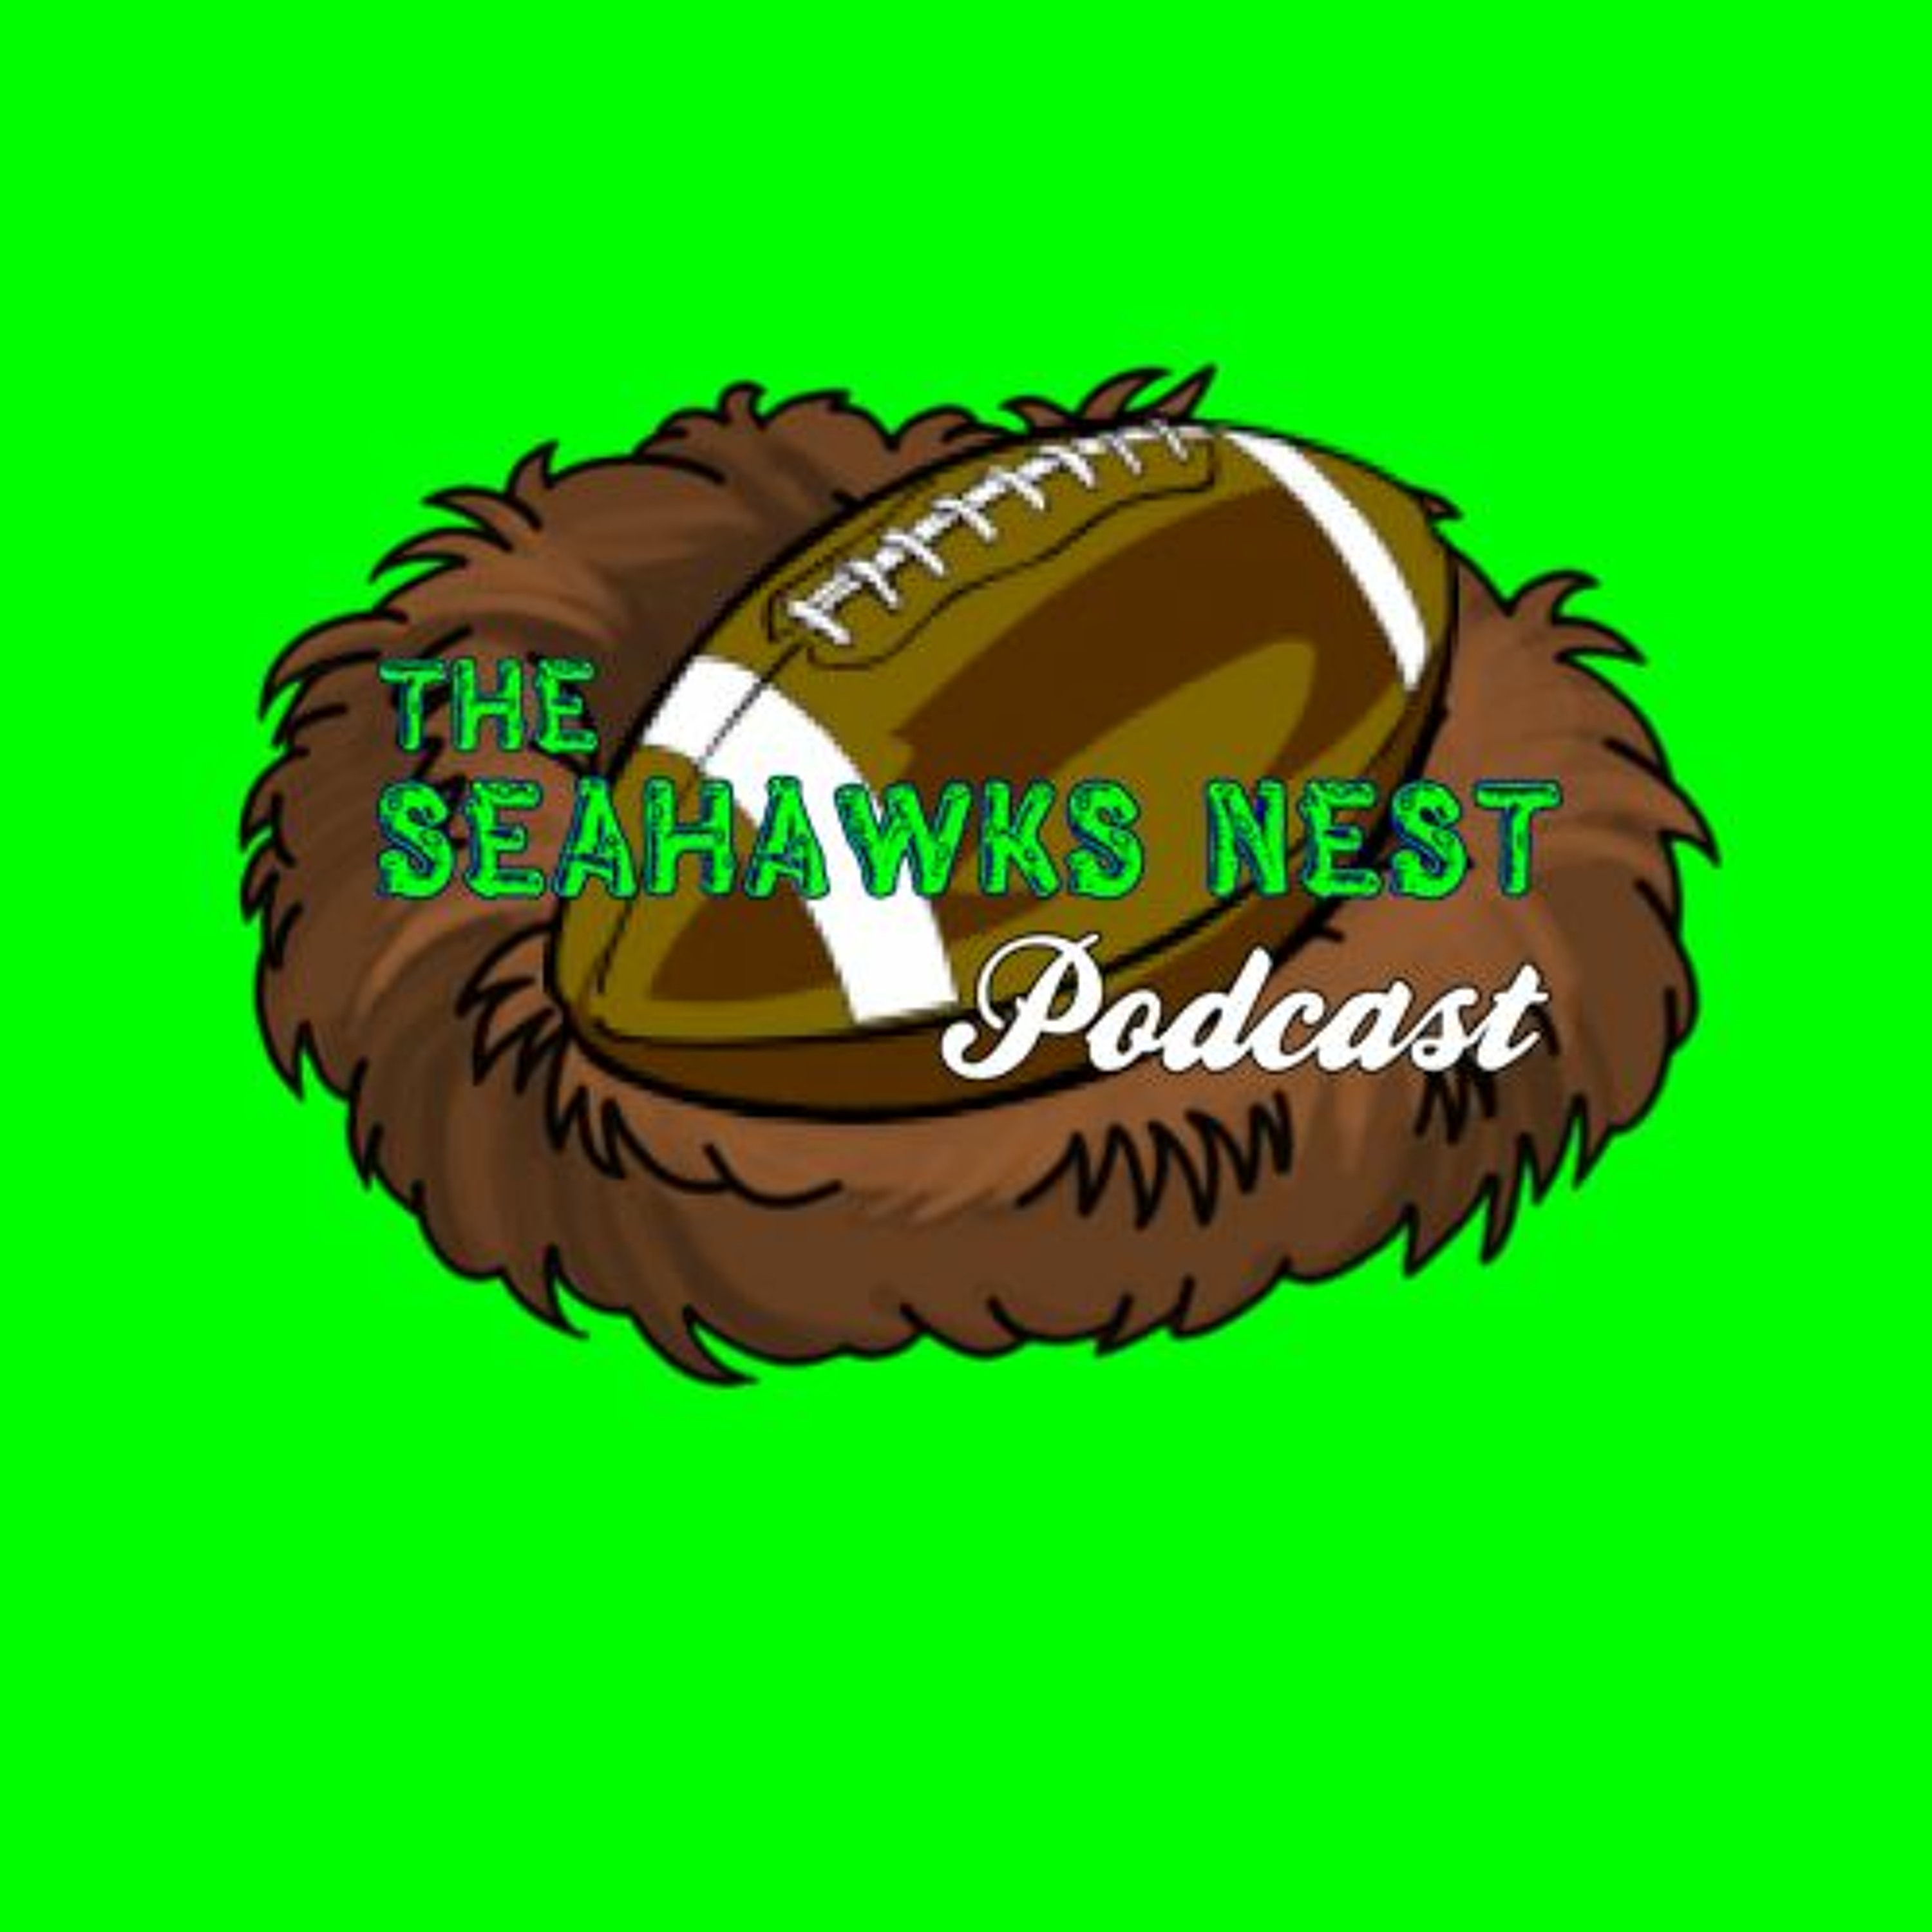 Episode 340 - Seahawks vs the AFC South